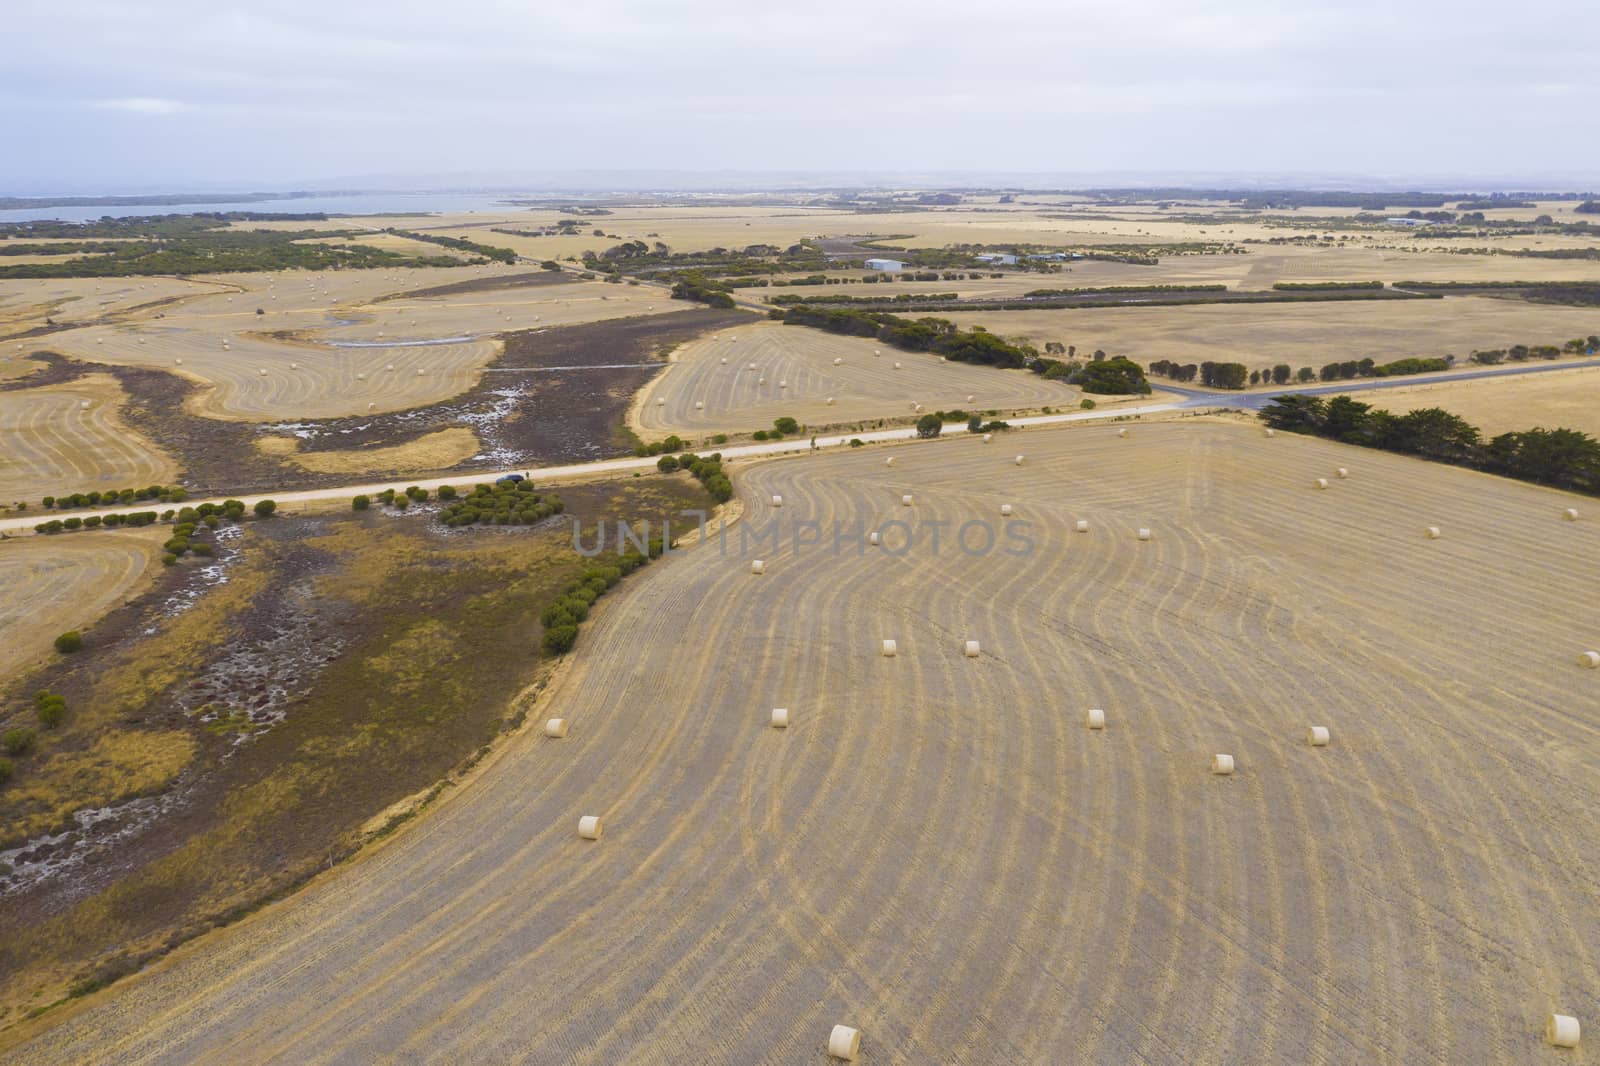 Aerial view of rolled hay bales in an agricultural field in regional Australia by WittkePhotos